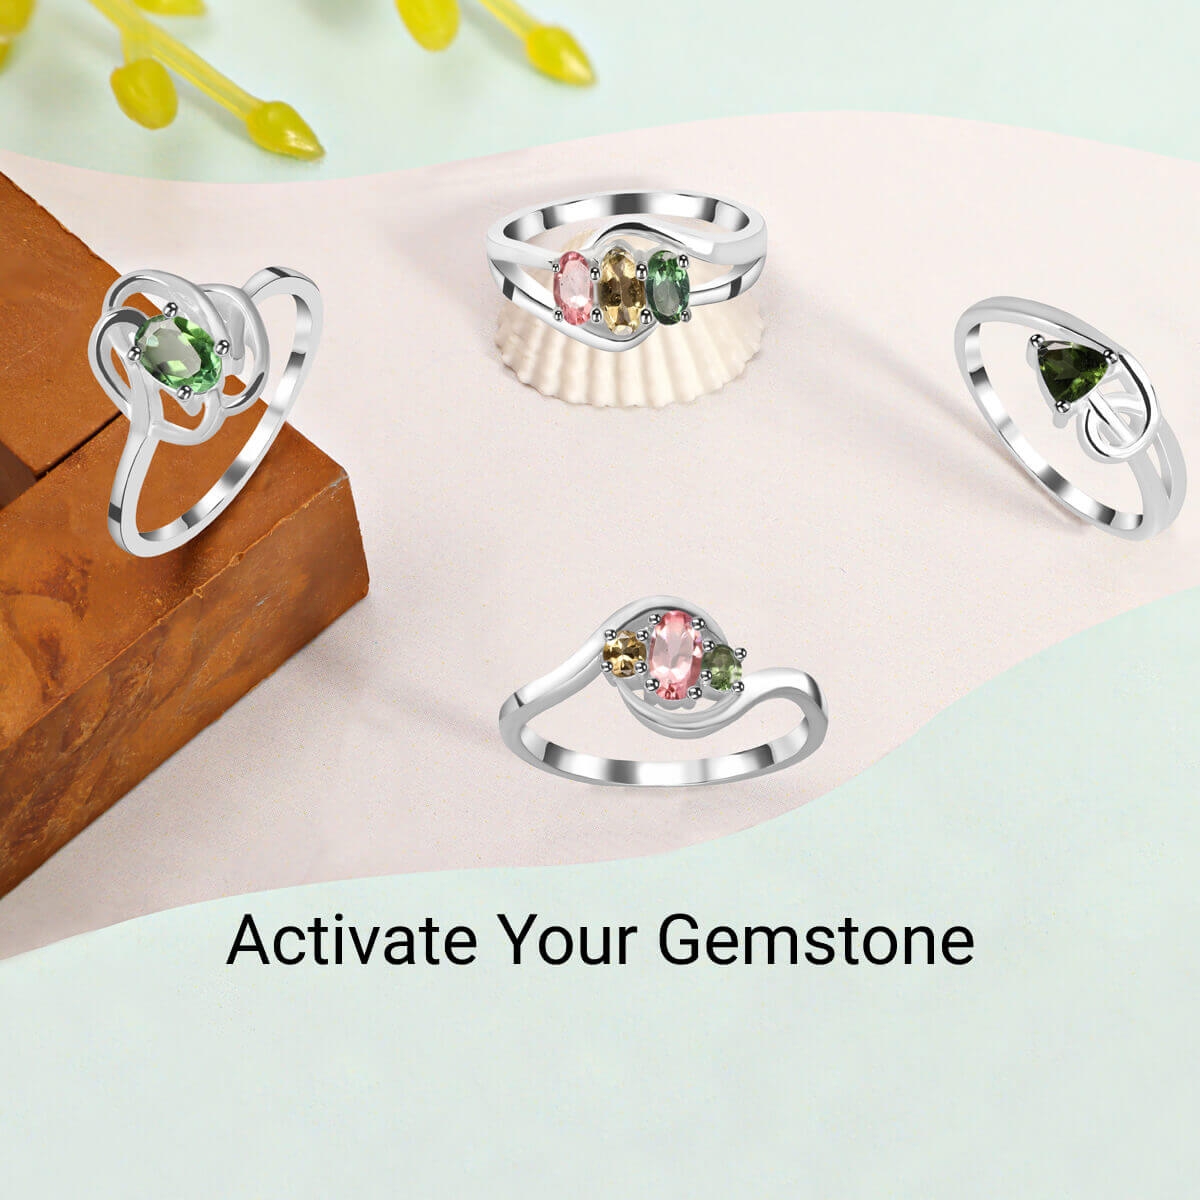 How to recharge your Gemstone rings